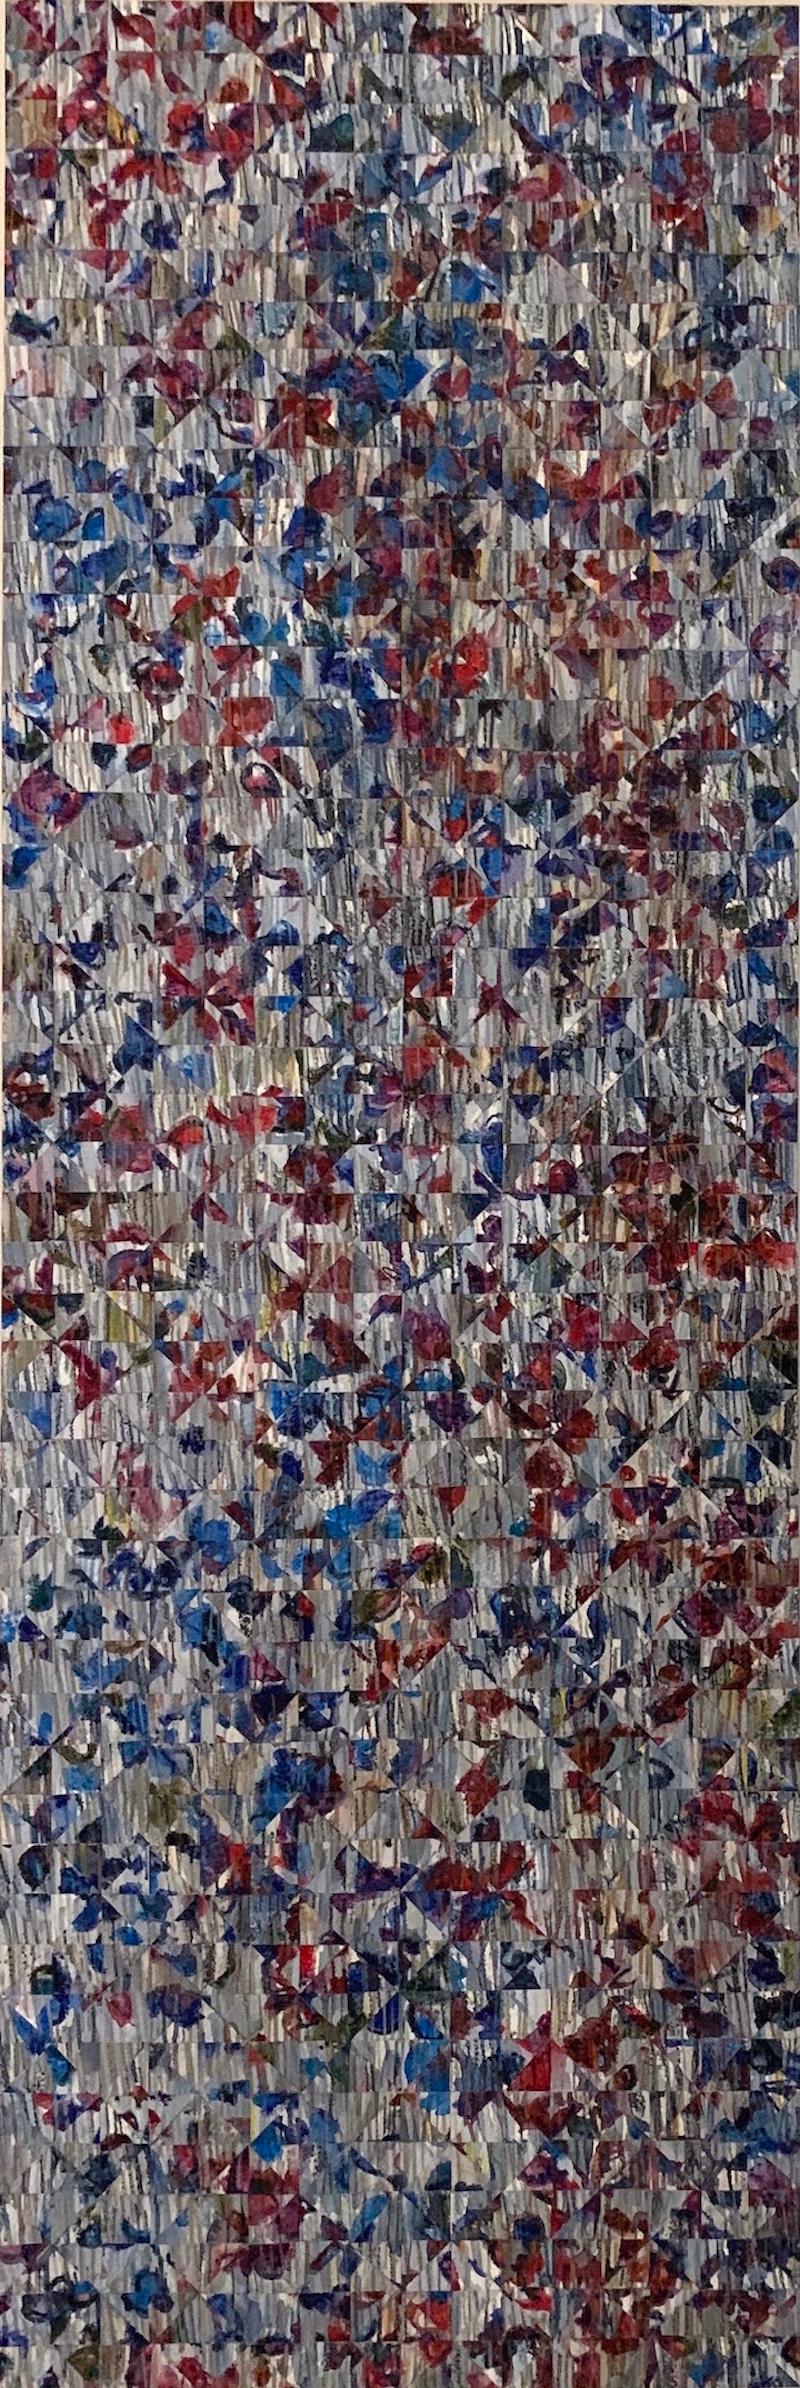 Gray with Red and Blue - vertical geometric mosaic painting on panel